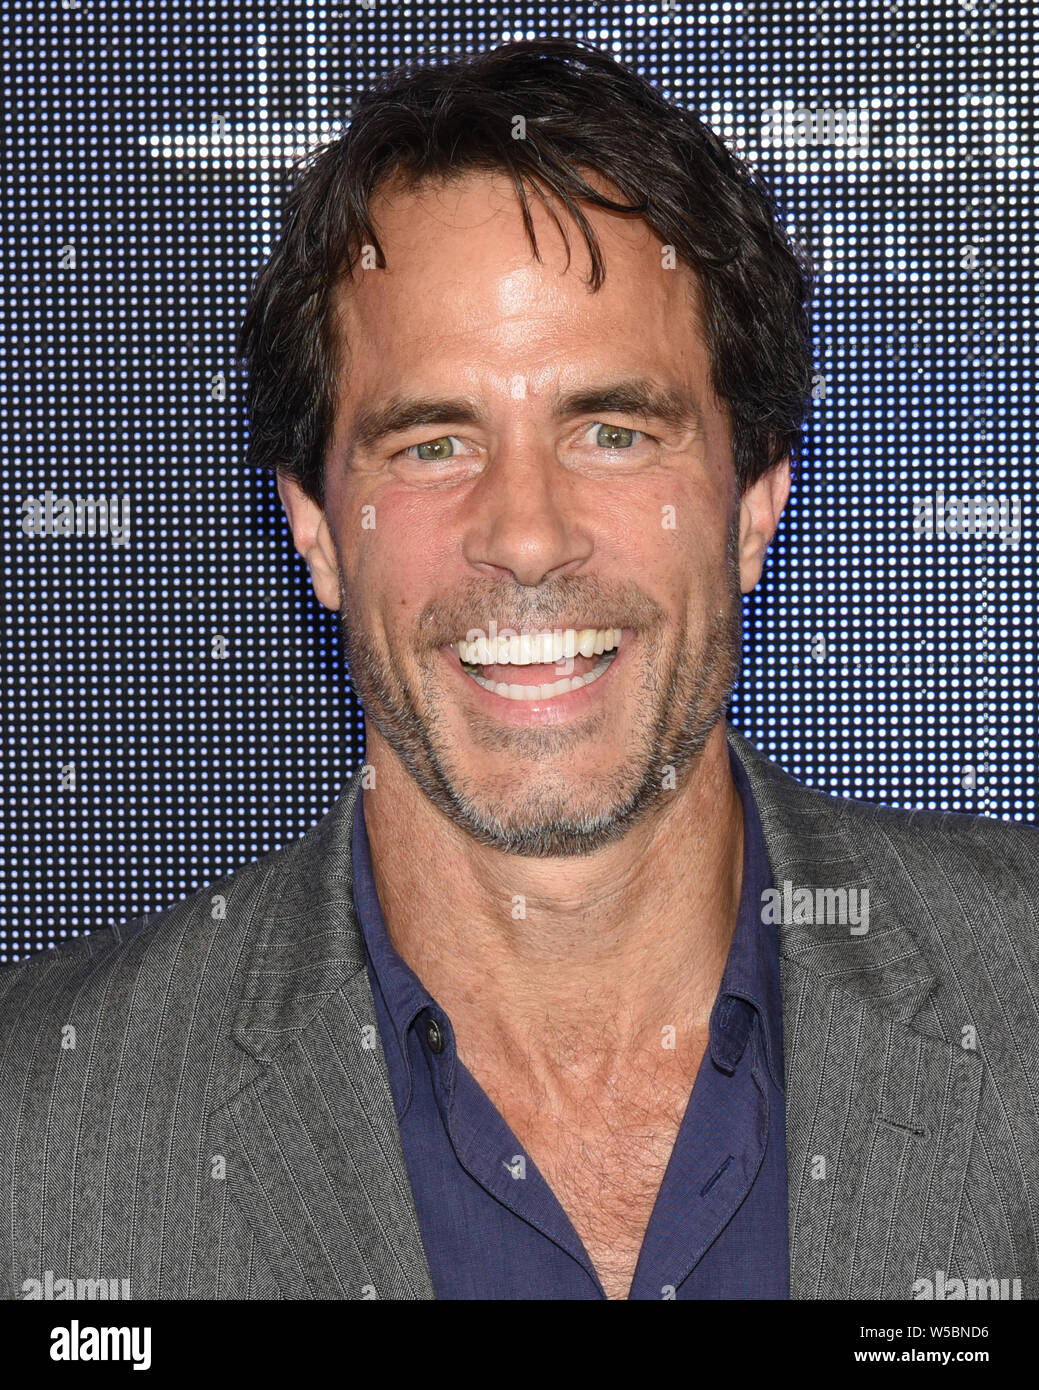 Beverly Hills, USA. 26th July, 2019. Shawn Christian attends the Hallmark Channel and Hallmark Movies & Mysteries Summer 2019 TCA at Private Residence, Beverly Hills, California on July 26, 2019. Credit: The Photo Access/Alamy Live News Stock Photo